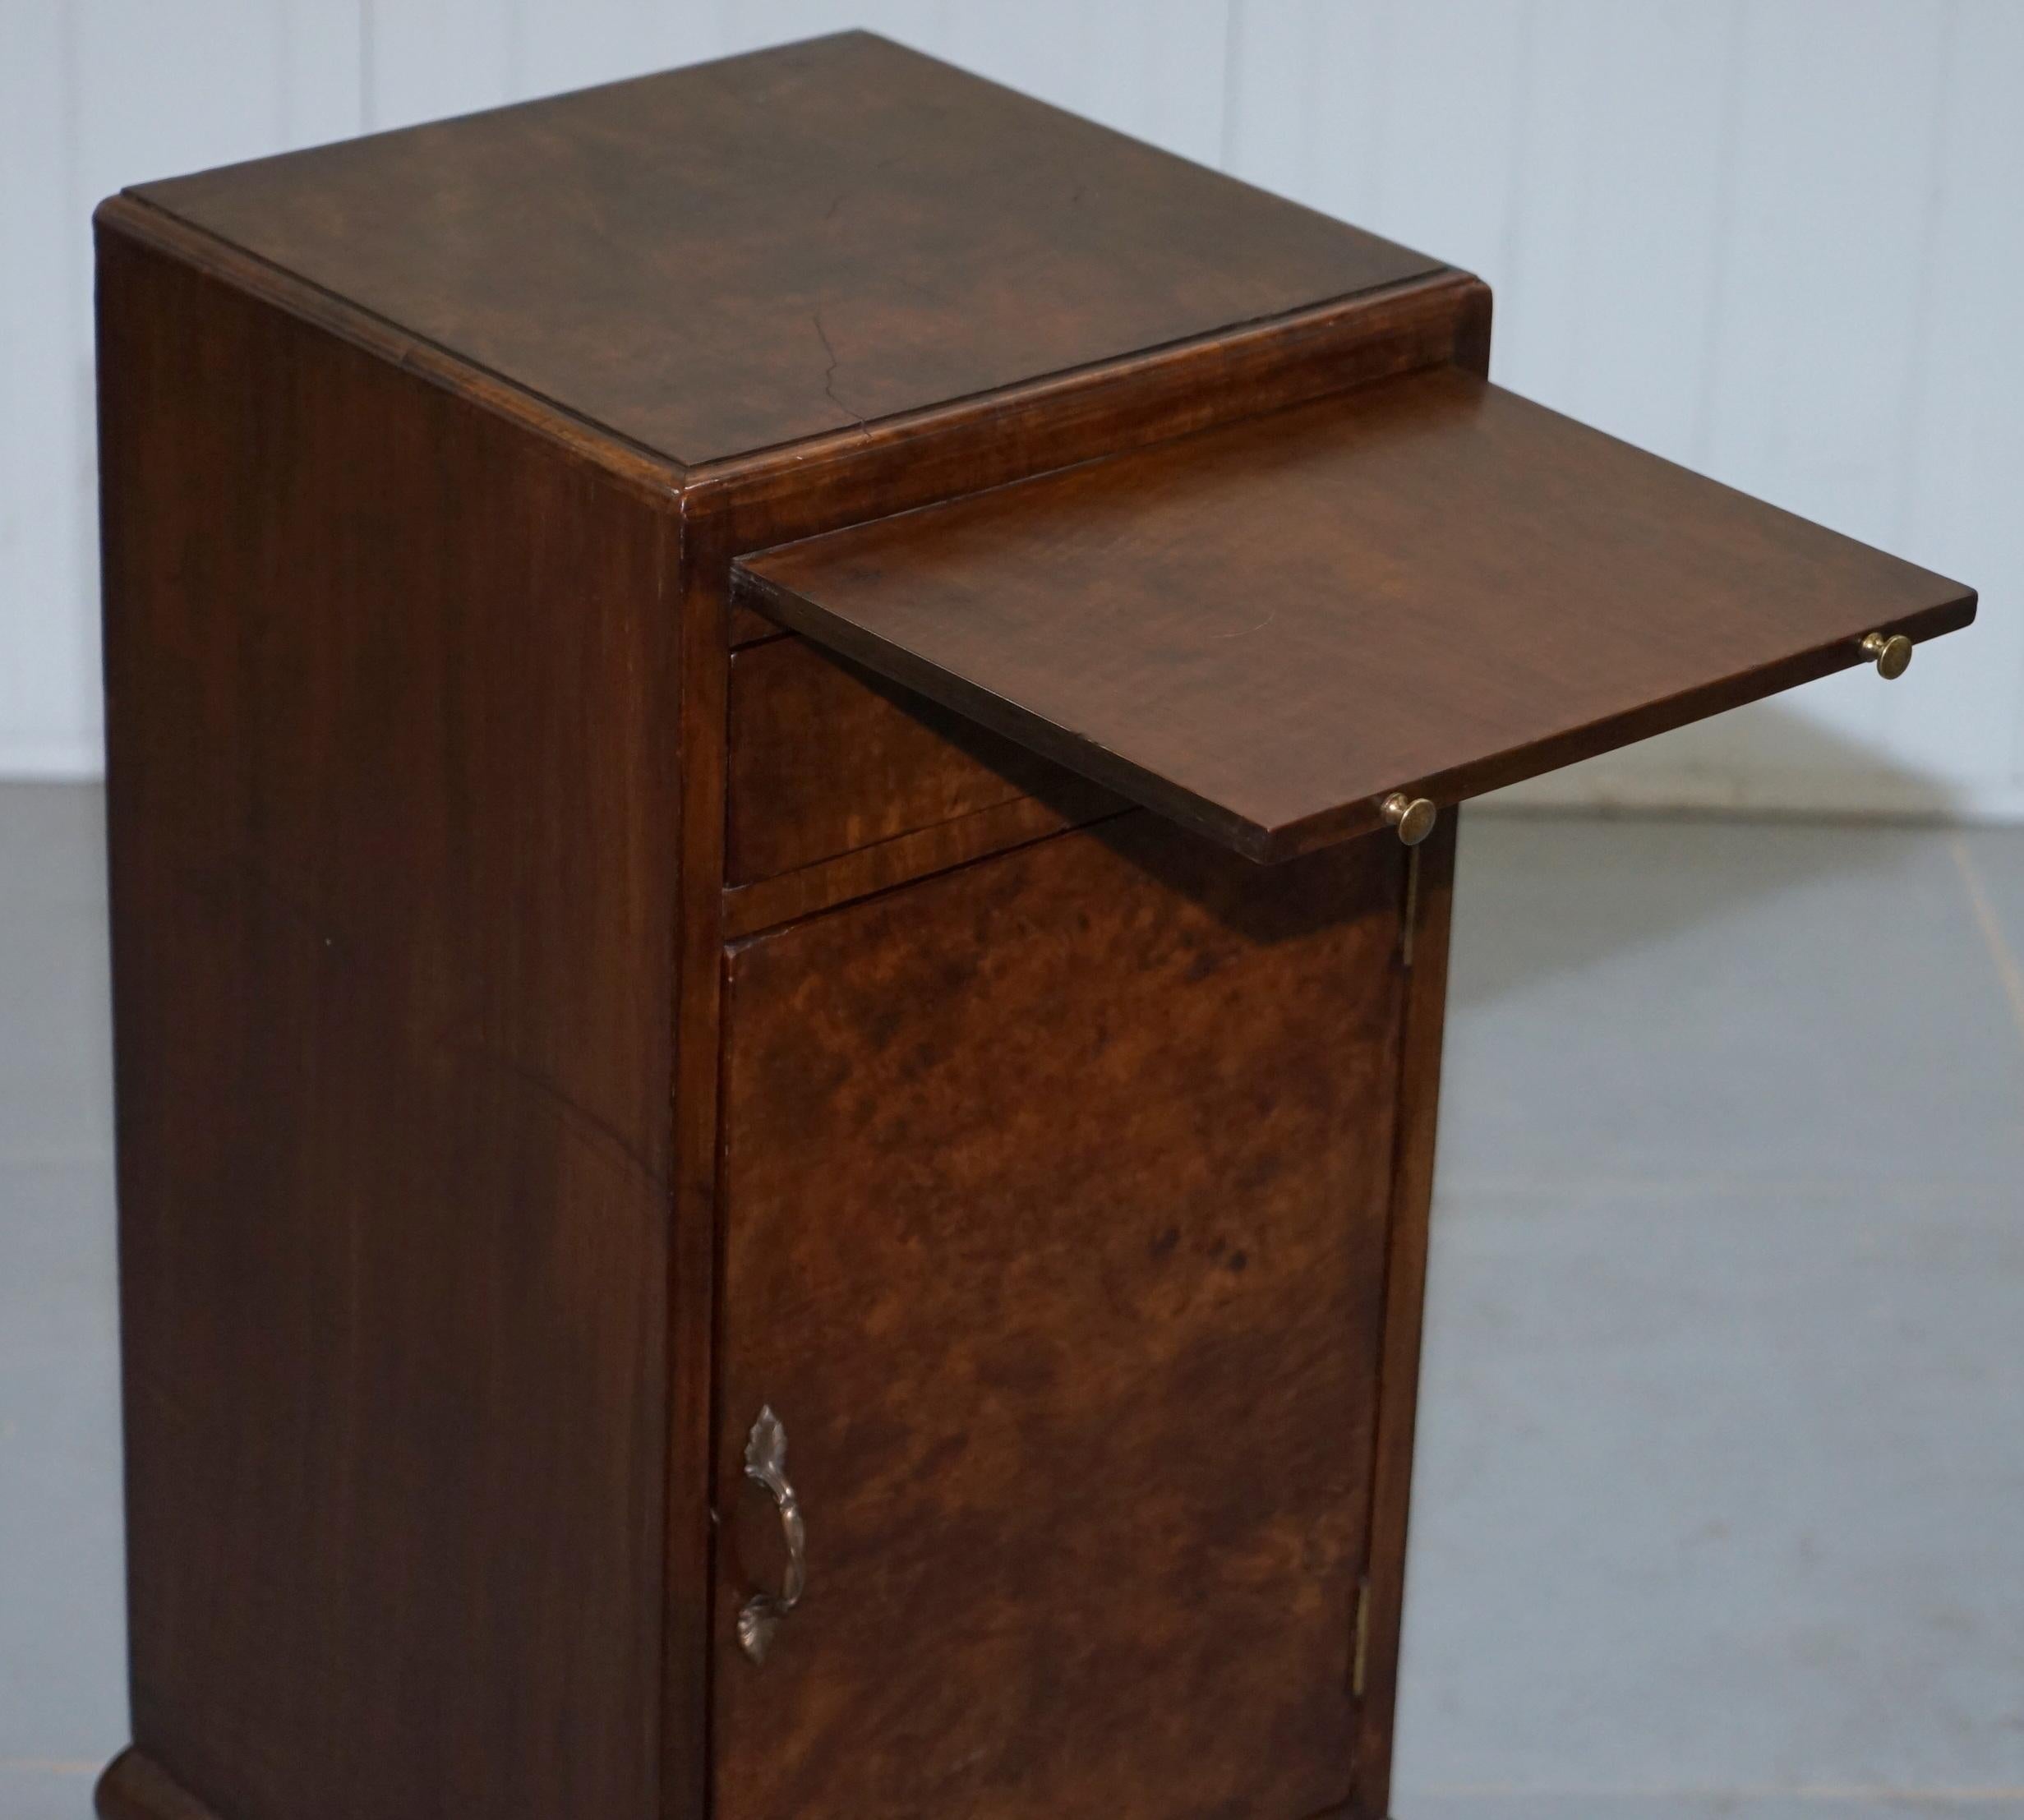 Rare 1920s Art Deco Burr Walnut Side Table with Butlers Serving Tray and Drawer 4